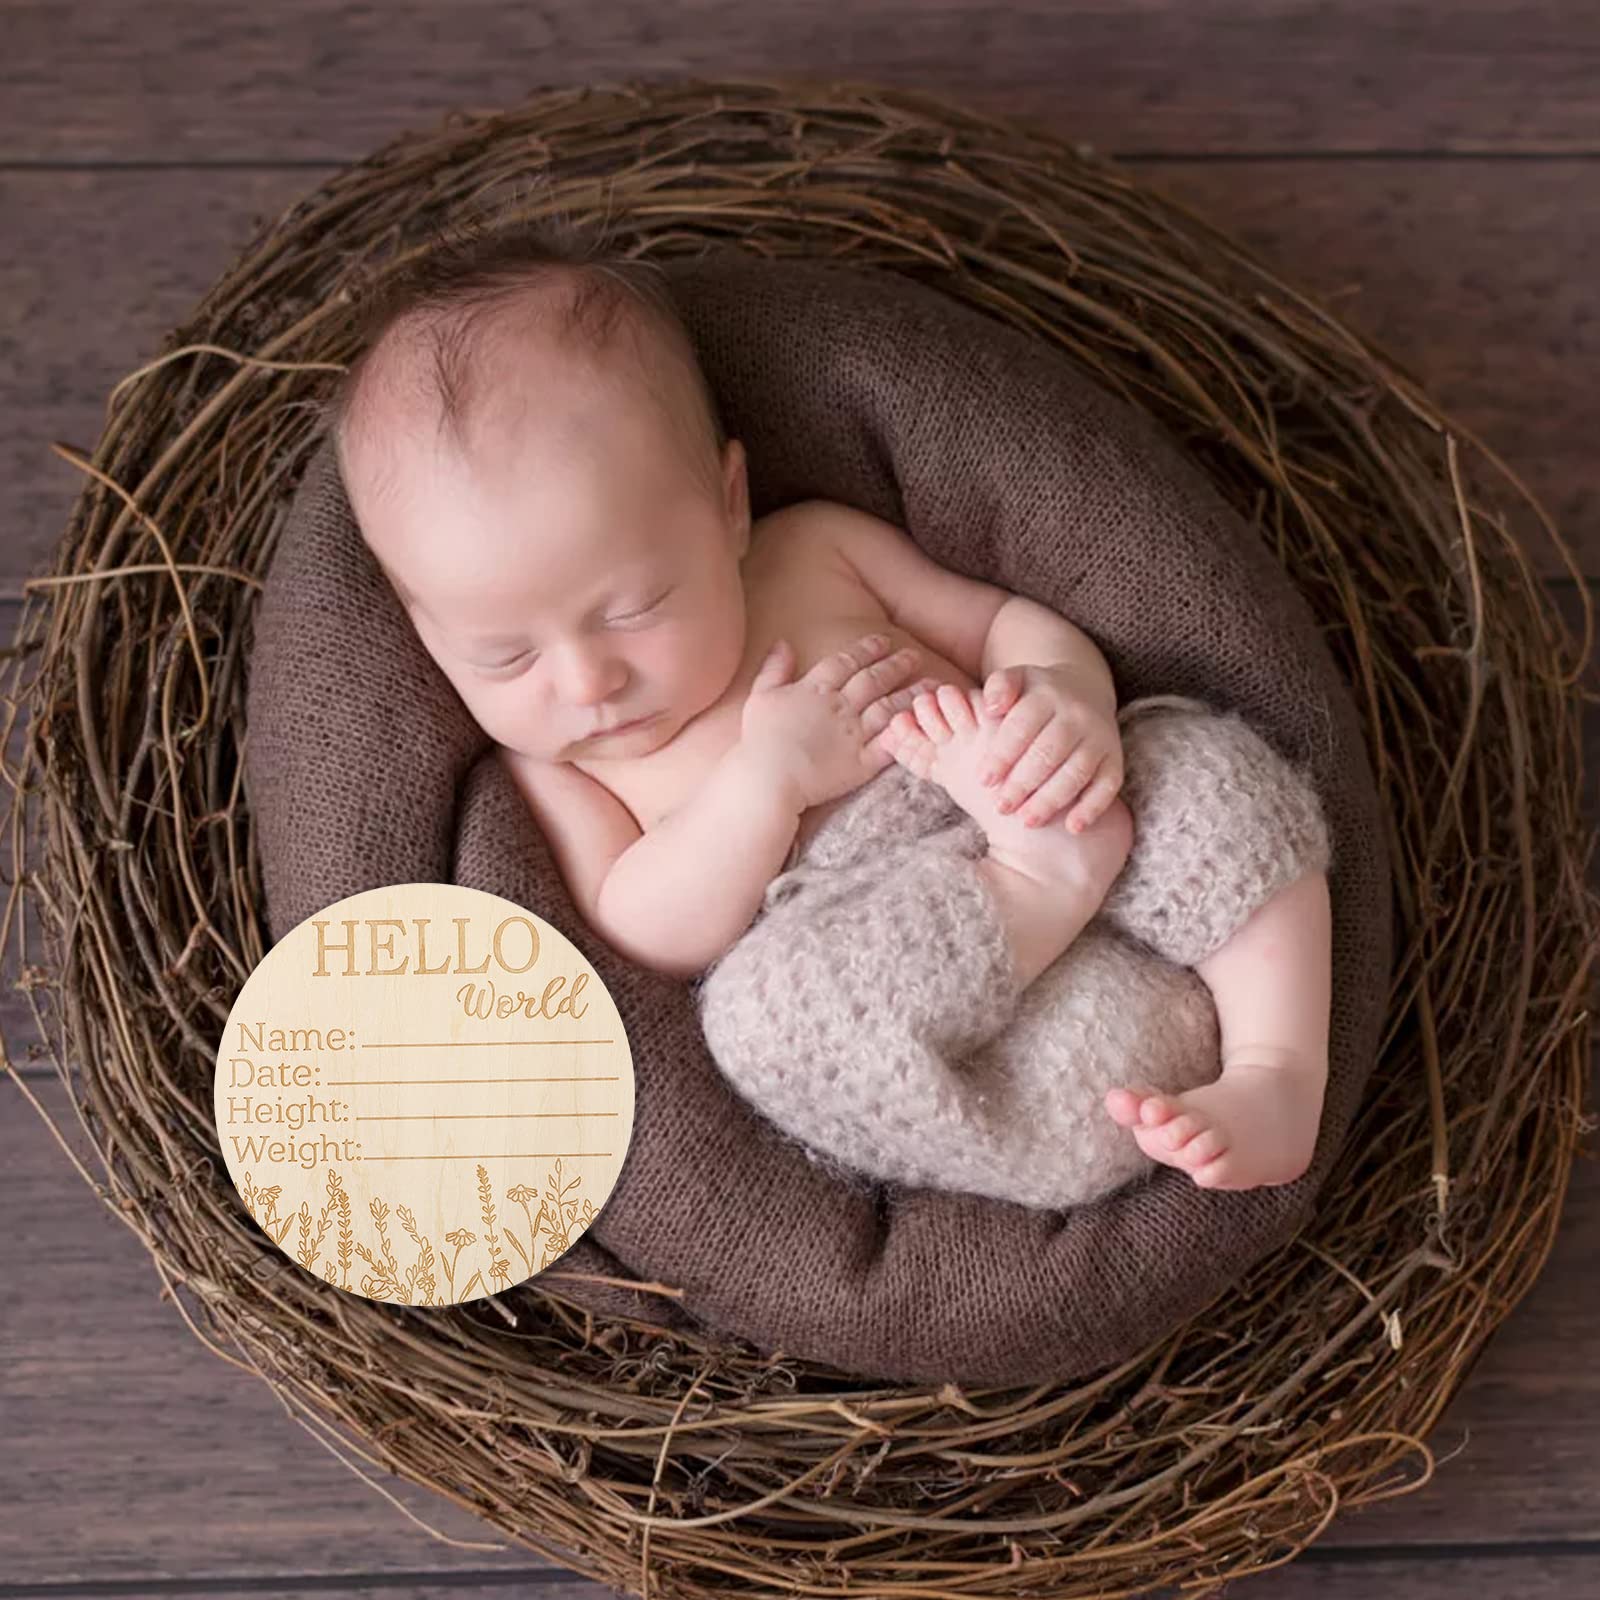 2pcs Newborn Baby Birth Announcement Sign, Round Wooden Baby Name Welcome Sign, Newborn Photo Props for Hospital Sign Baby Name and Birth Date (5.9 inch)